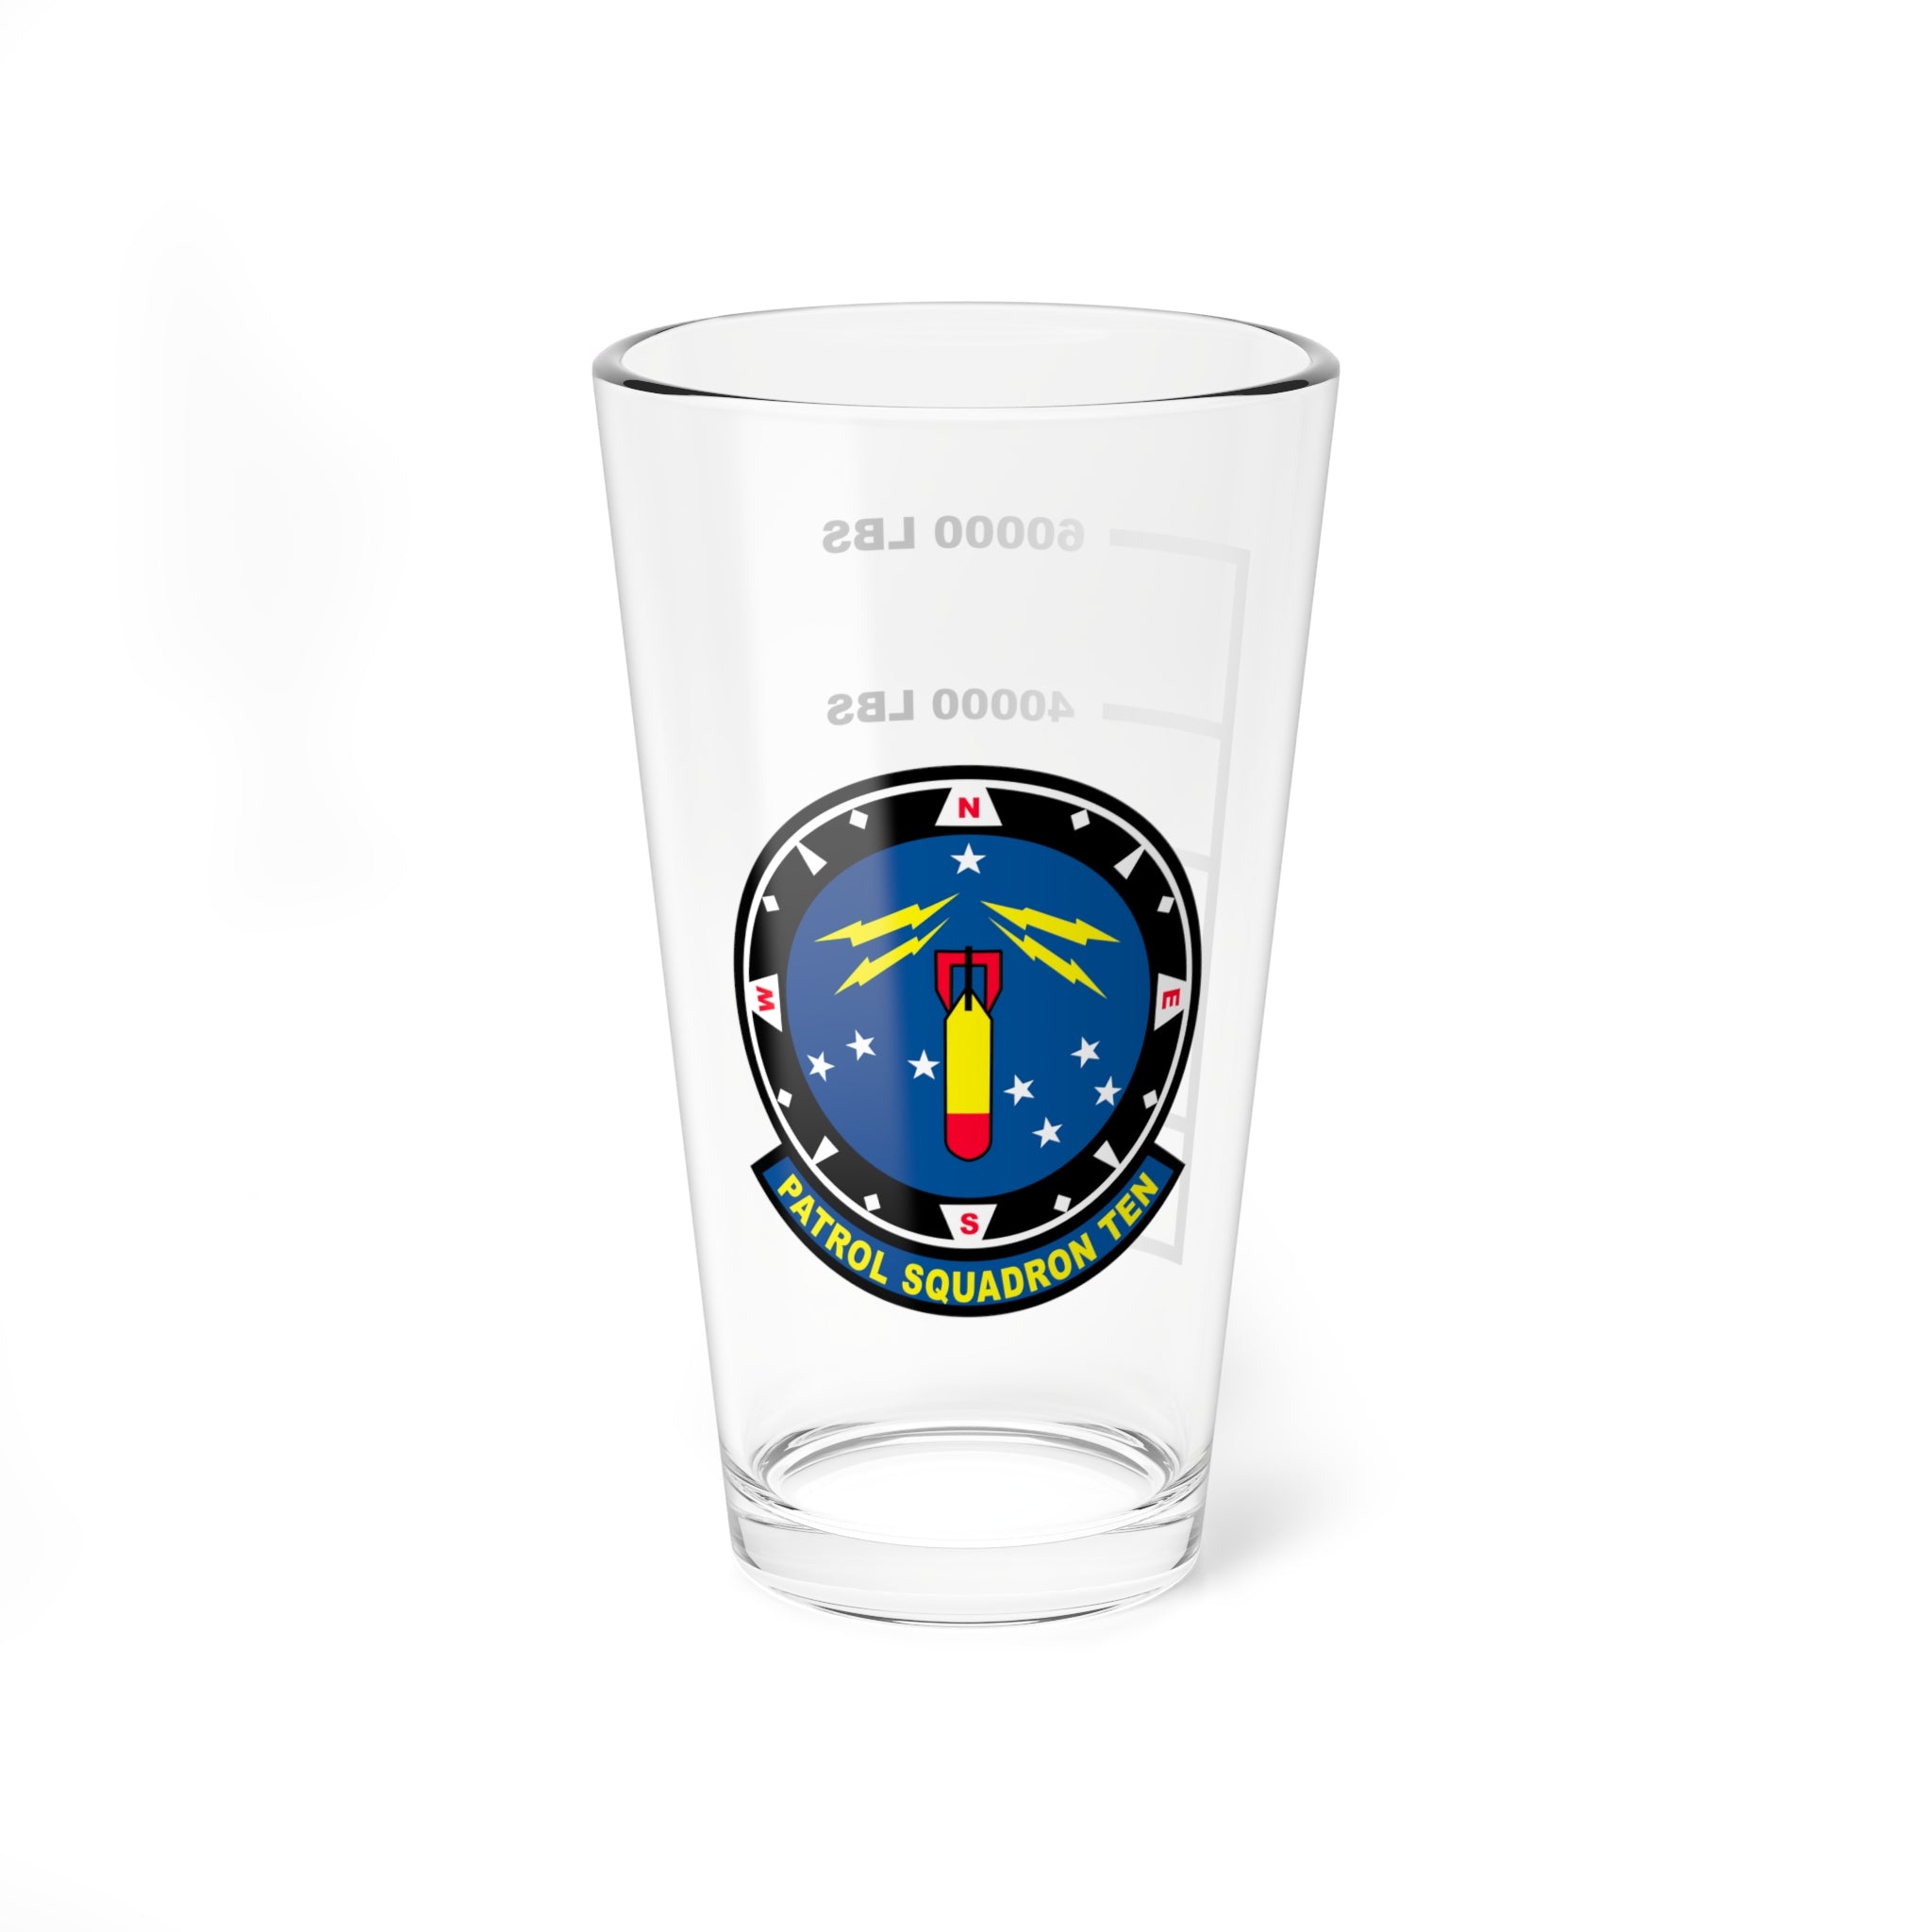 VP-10 "Red Lancers" Fuel Low Pint Glass, Navy Maritime Patrol Squadron flying the P-3 Orion and P-8 Poseidon